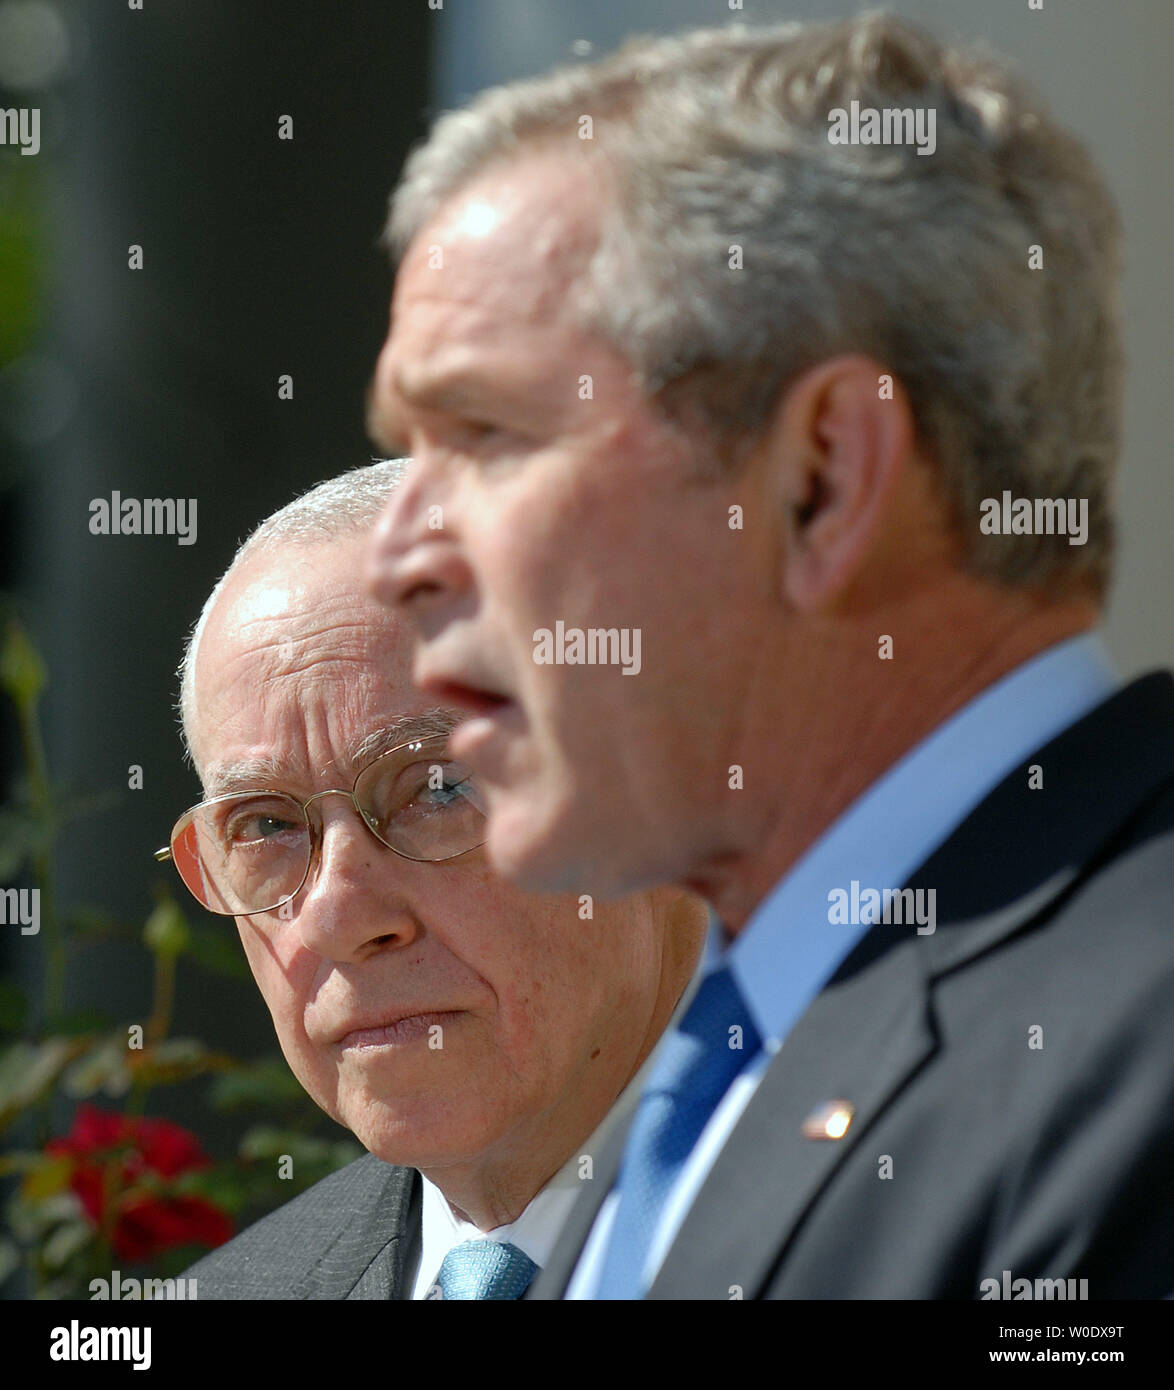 U.S. President George W. Bush (R) announces Michael B. Mukasey, a retired federal judge from New York, to replace Alberto Gonzales as attorney general in the Rose Garden of the White House on September 17, 2007.   (UPI Photo/Roger L. Wollenberg) Stock Photo